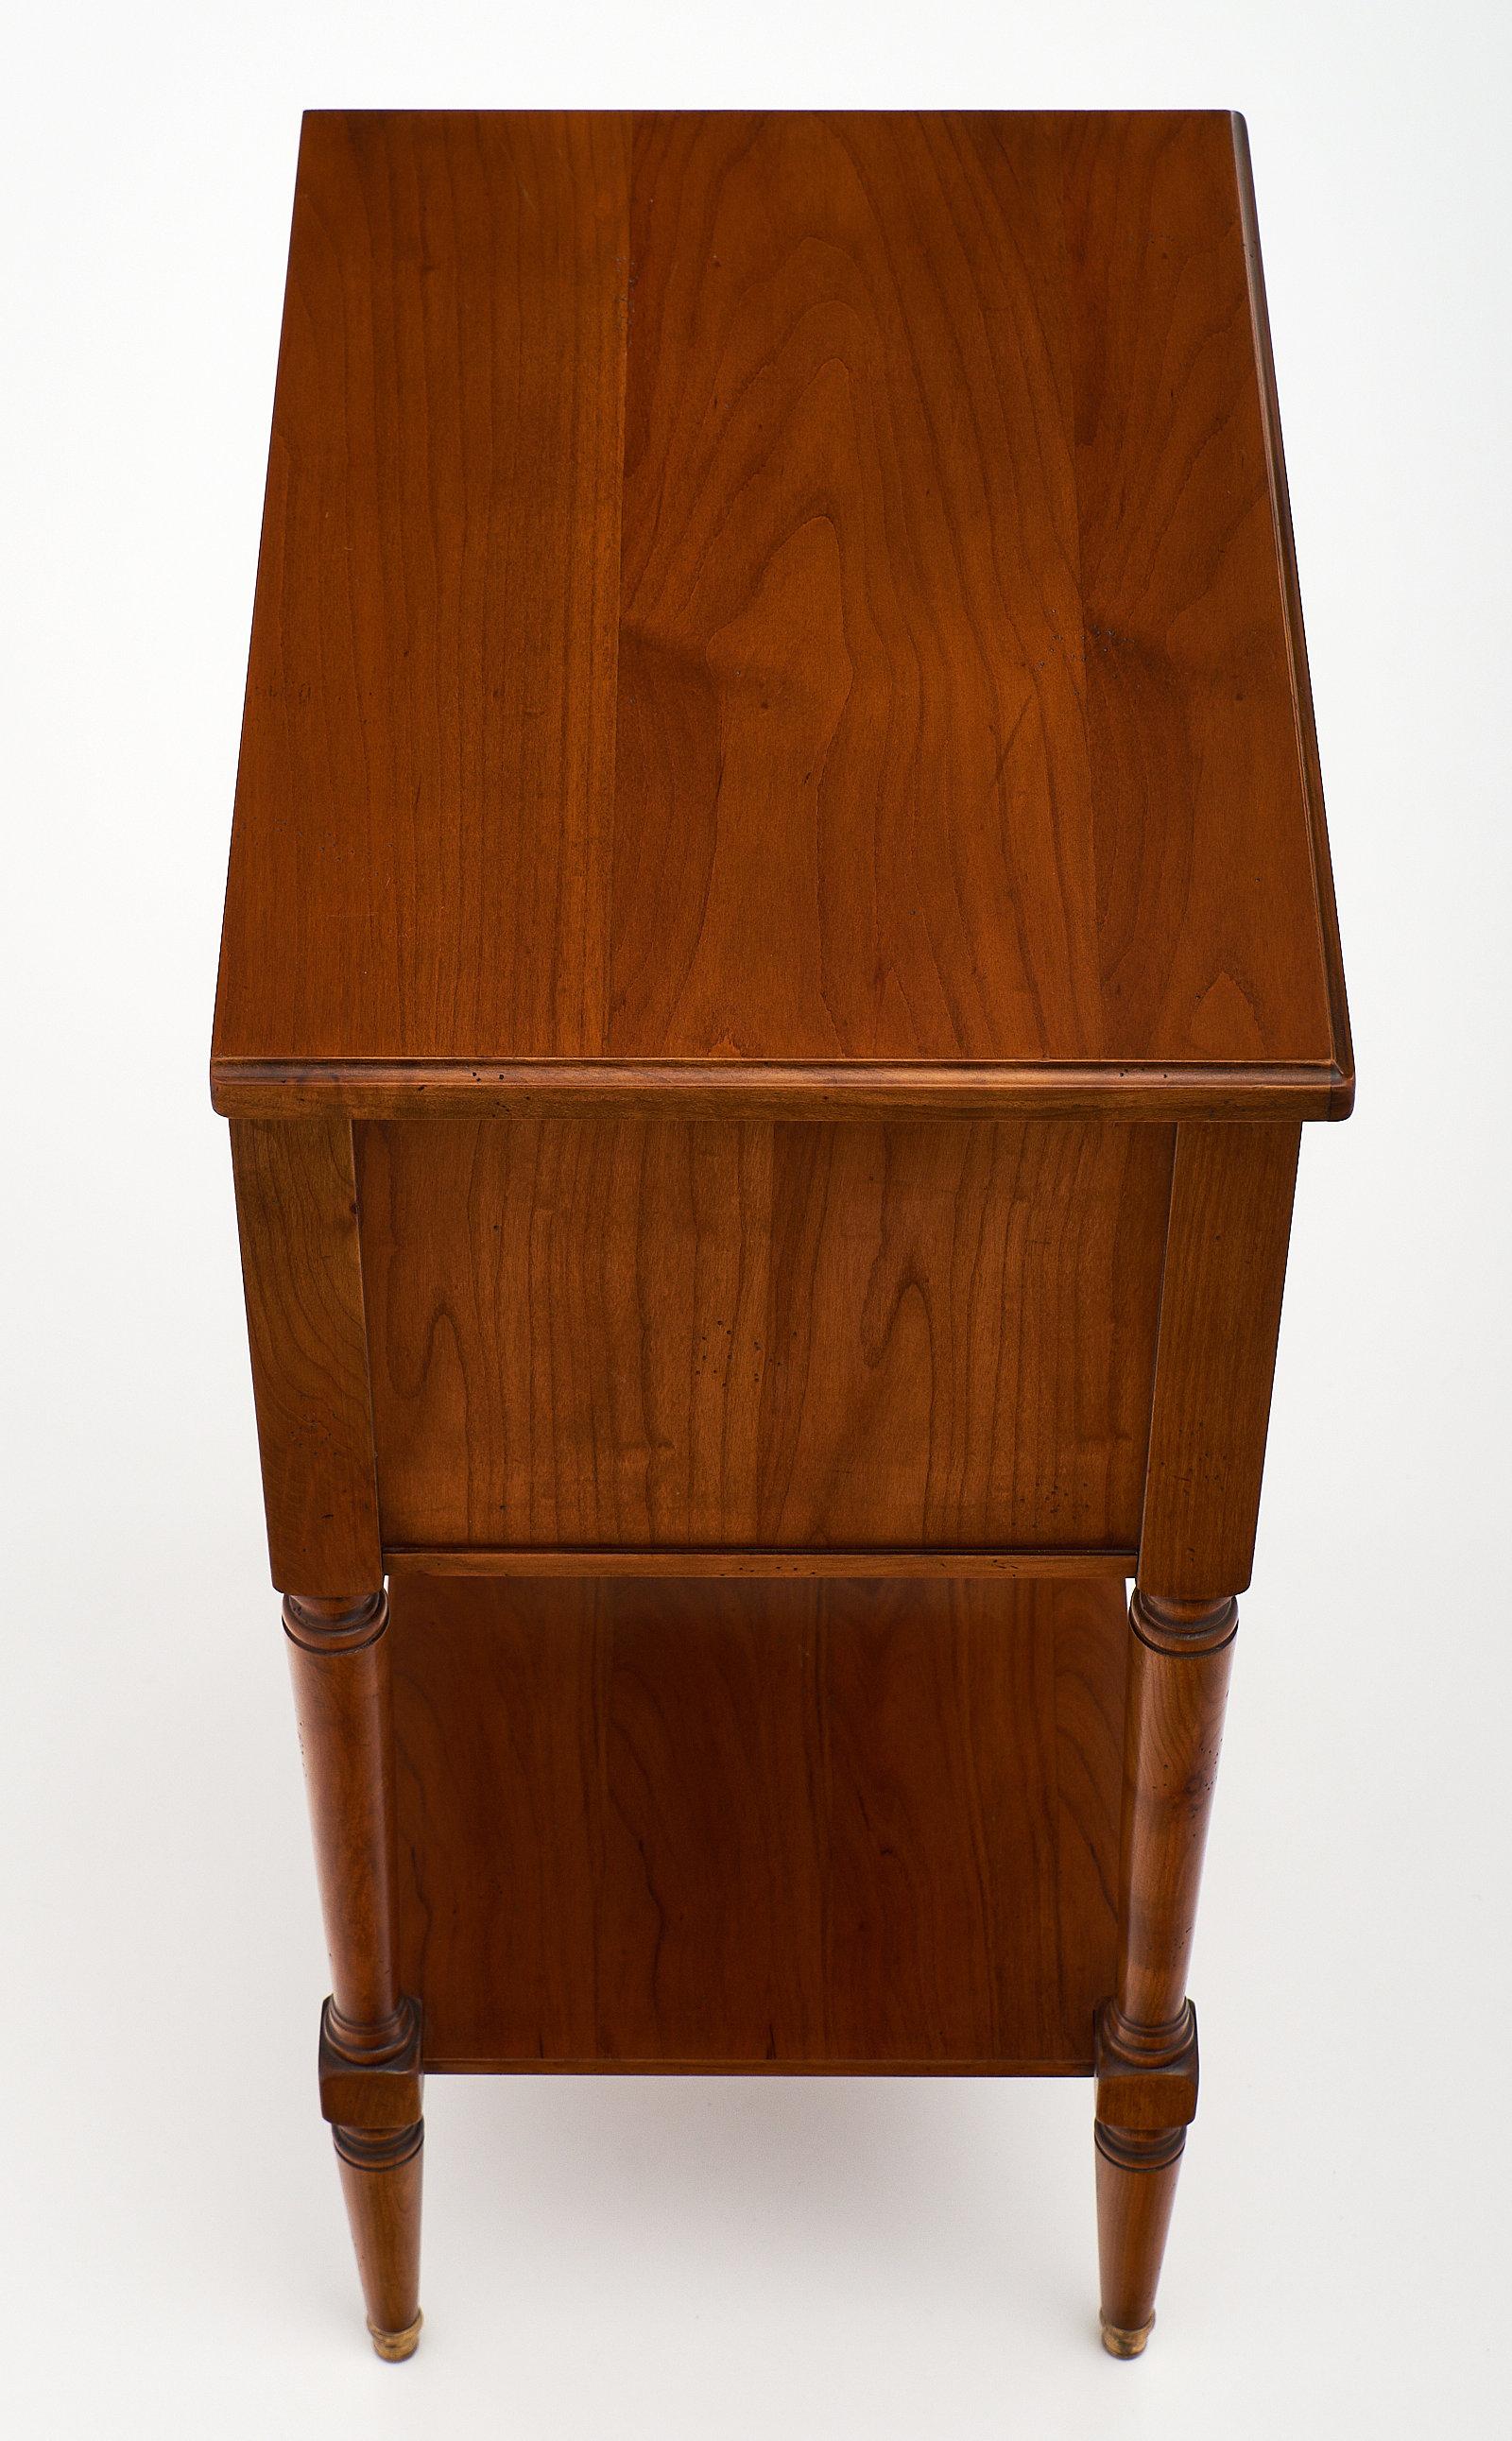 Early 20th Century Cherrywood Louis XVI Style Side Table